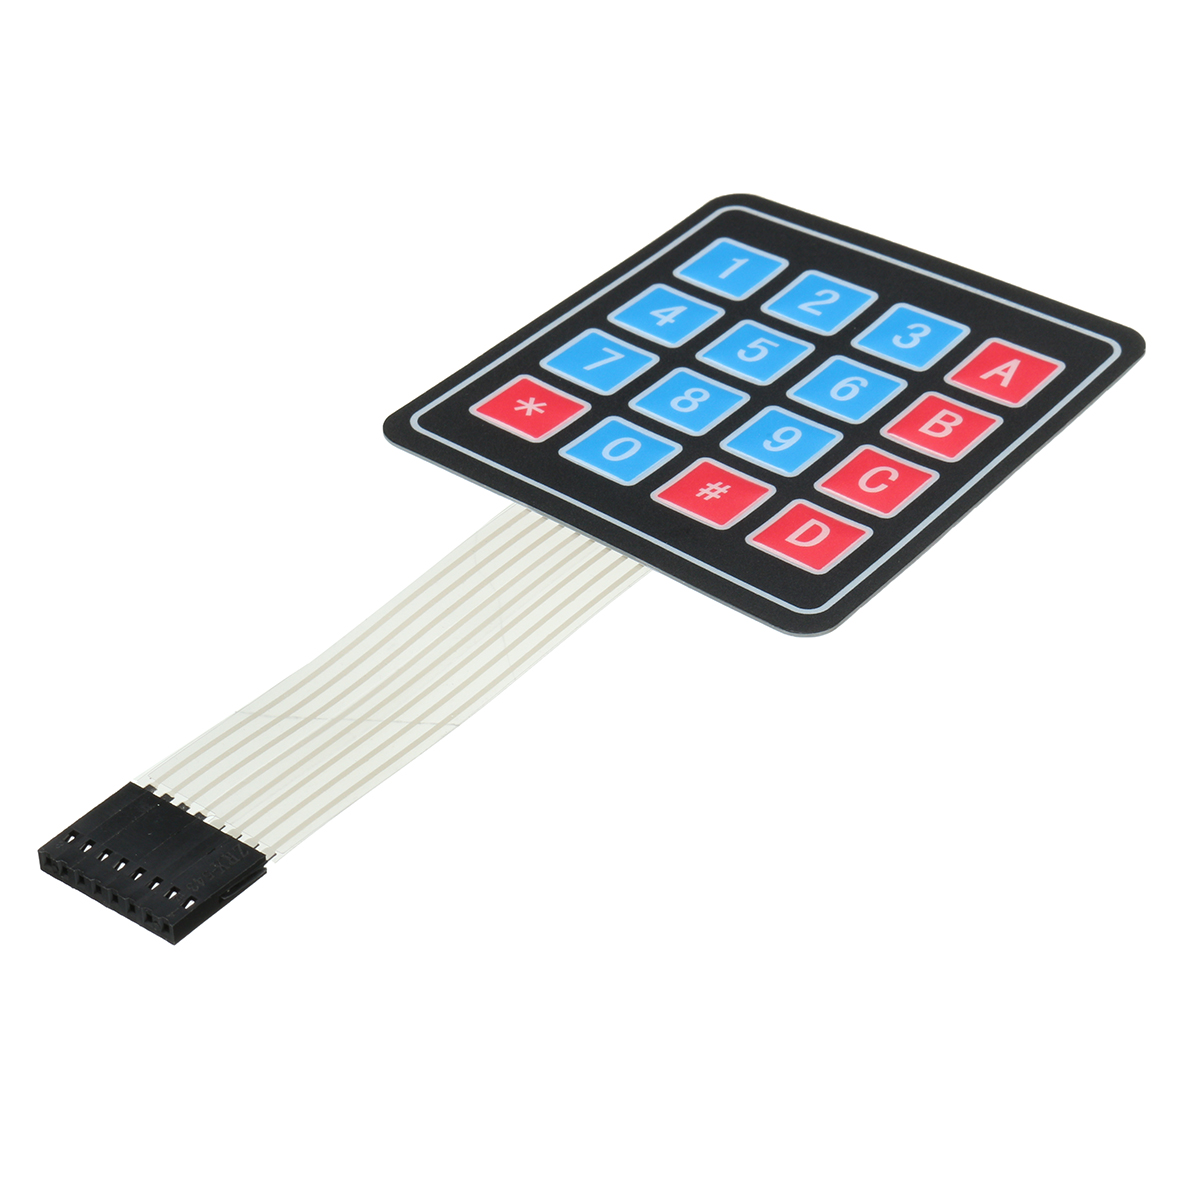 Find 4x4 Matrix Array 16 Key Membrane Switch Keypad Keyboard for Arduino/AVR for Sale on Gipsybee.com with cryptocurrencies